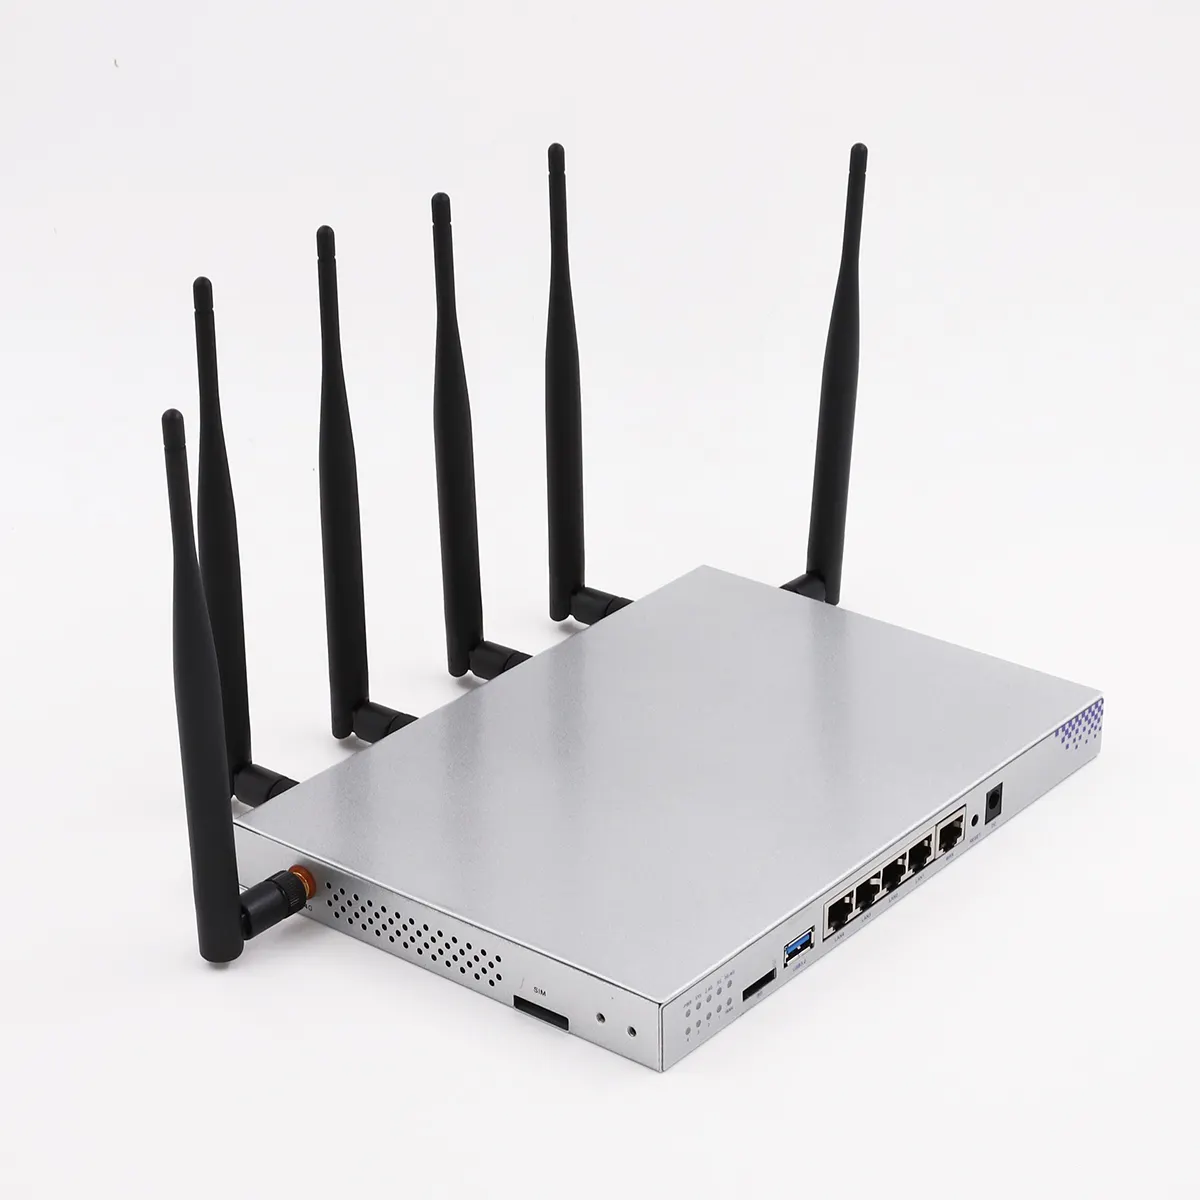 WG3526 wifi router with best range Support customized logo, customized firmware openvpn ipsec poe router